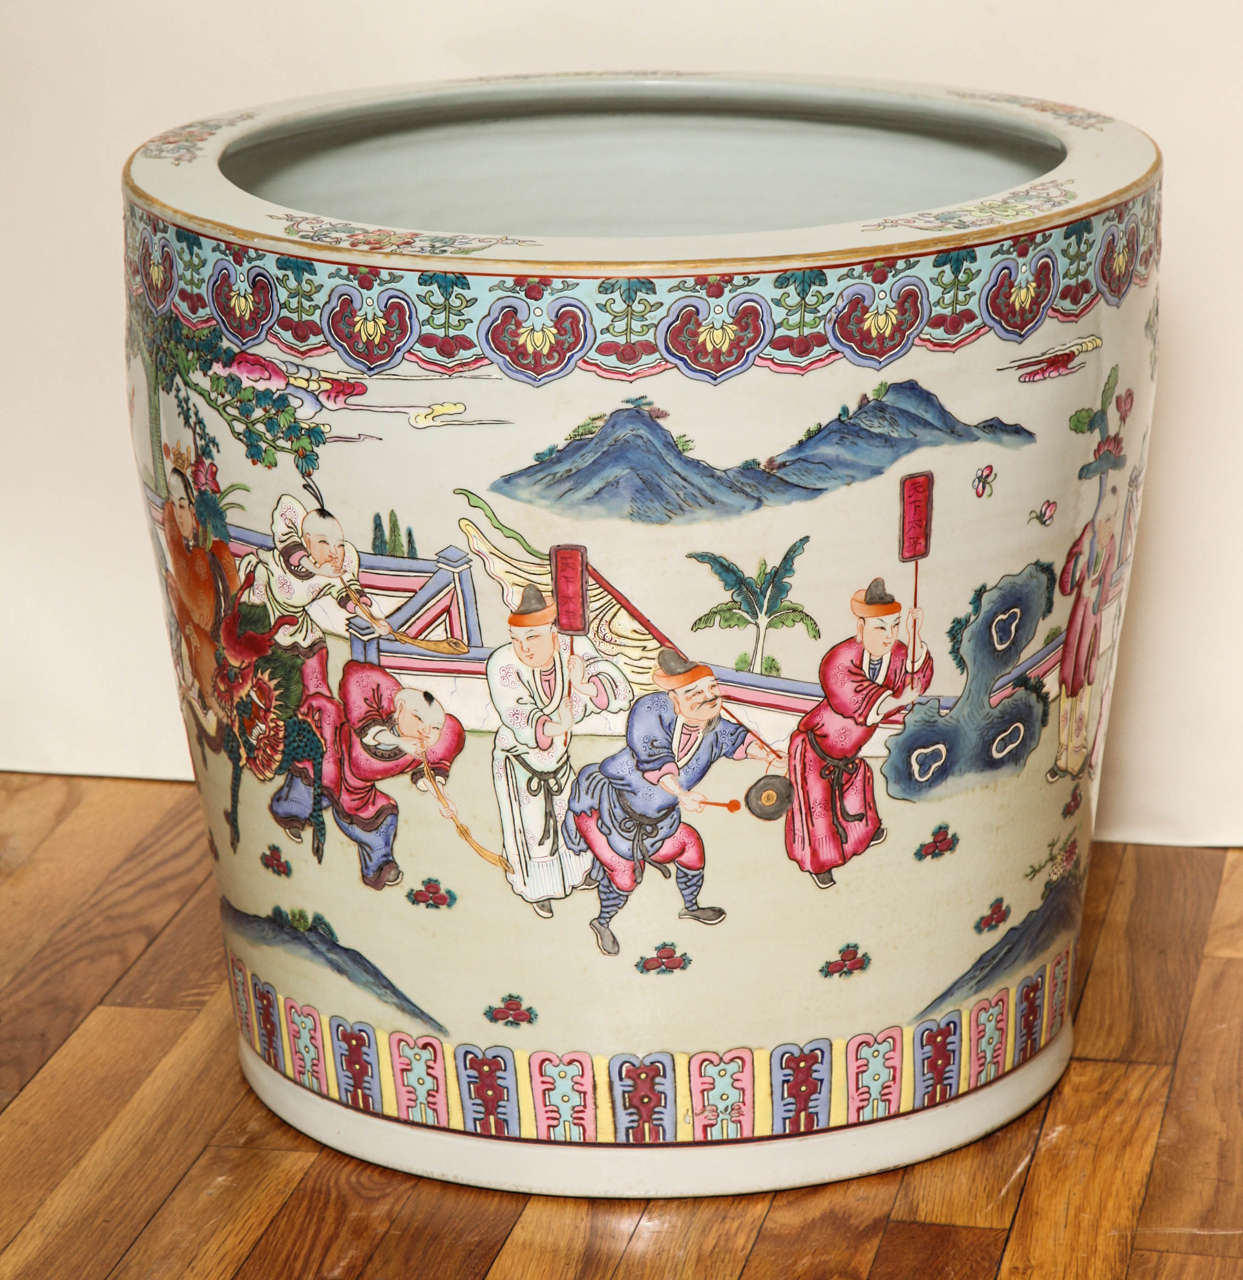 A Chinese porcelain fishbowl with polychrome figures in landscape on an ivory colored ground.